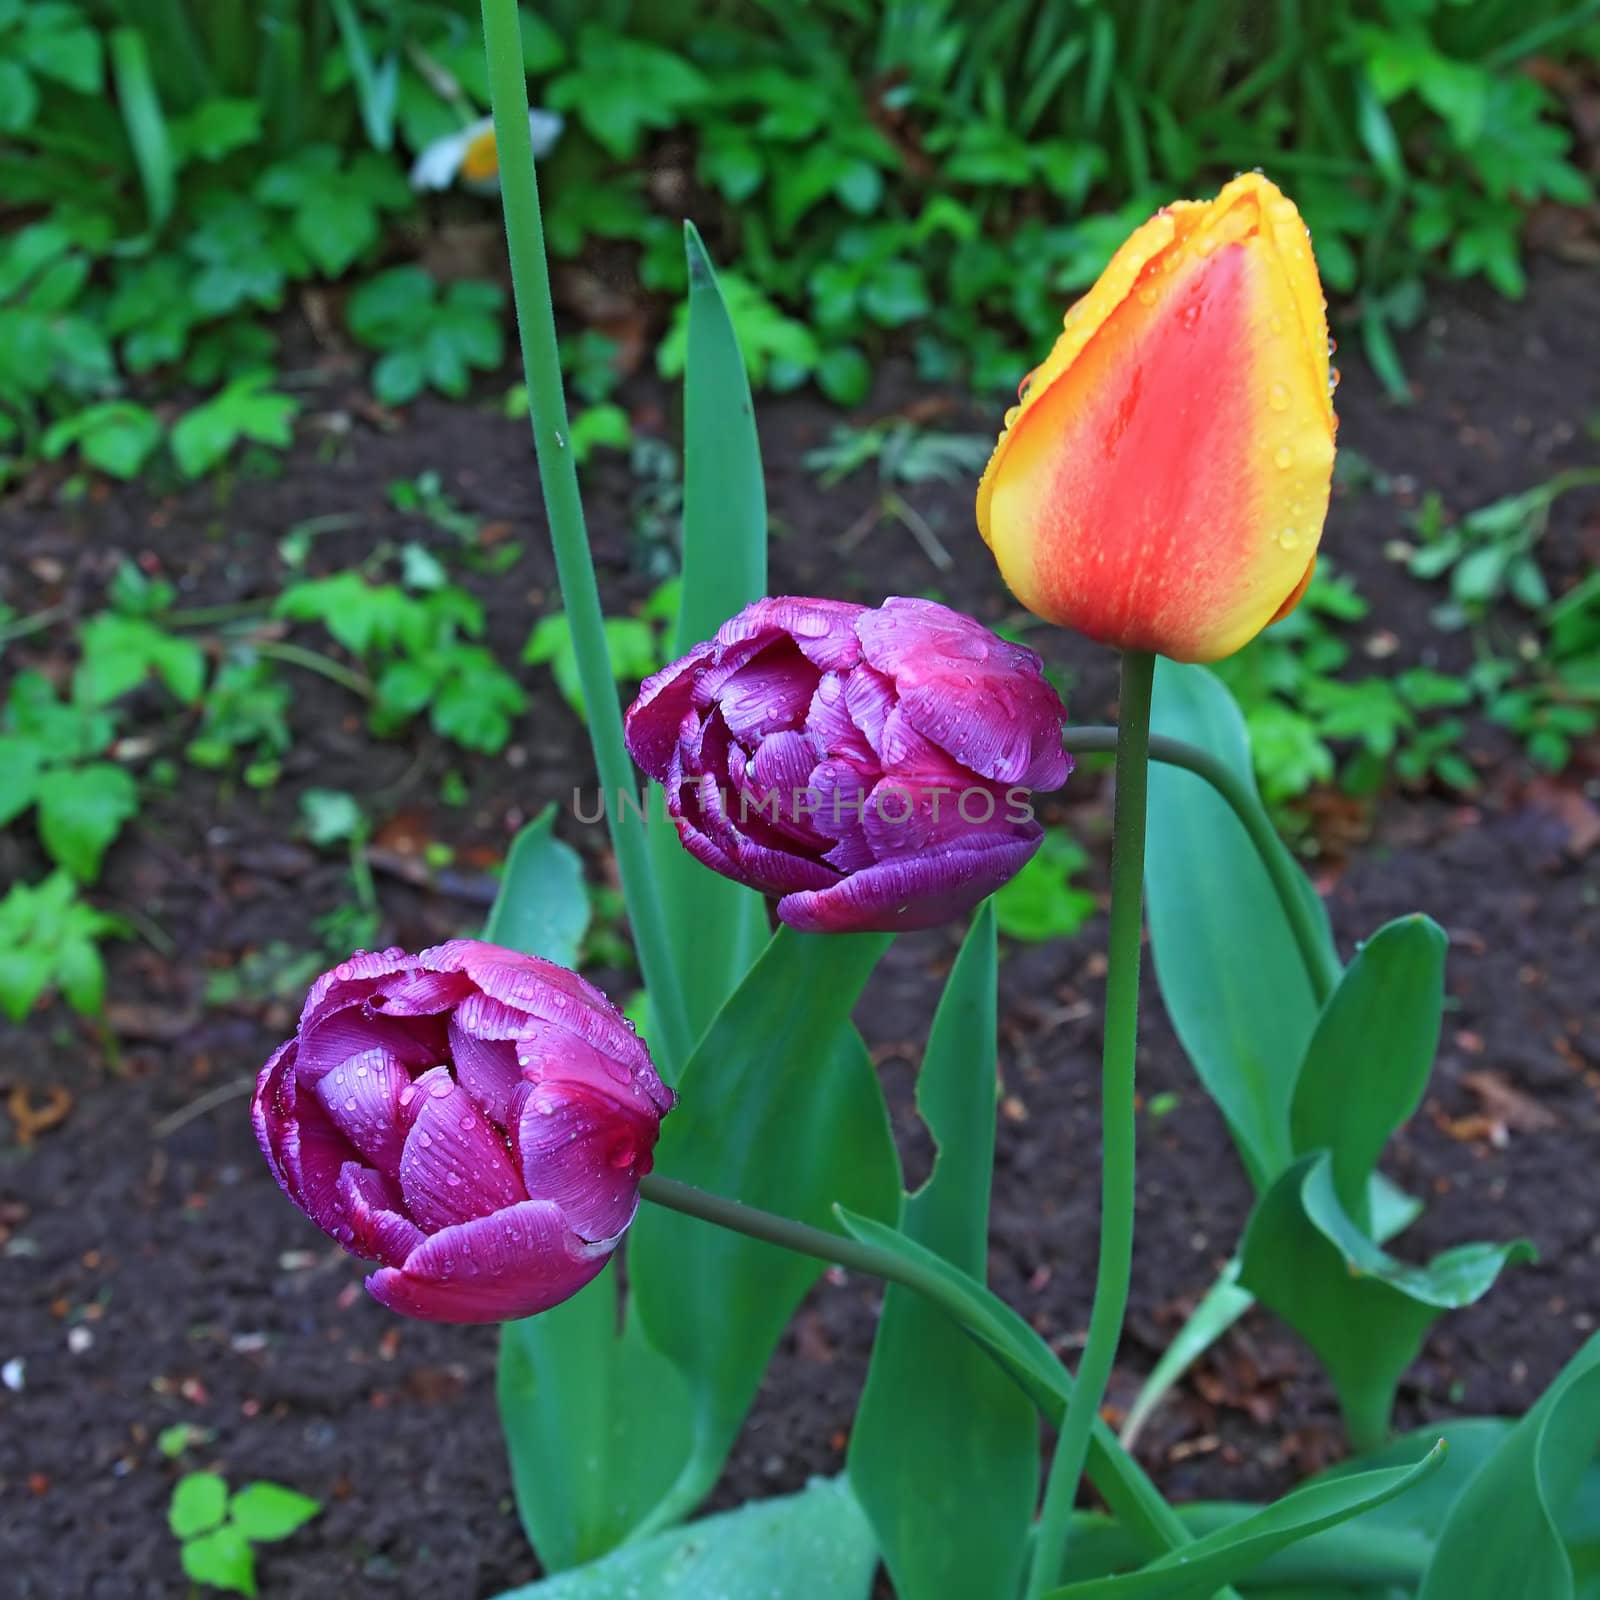 varicoloured tulips with rural garden by basel101658